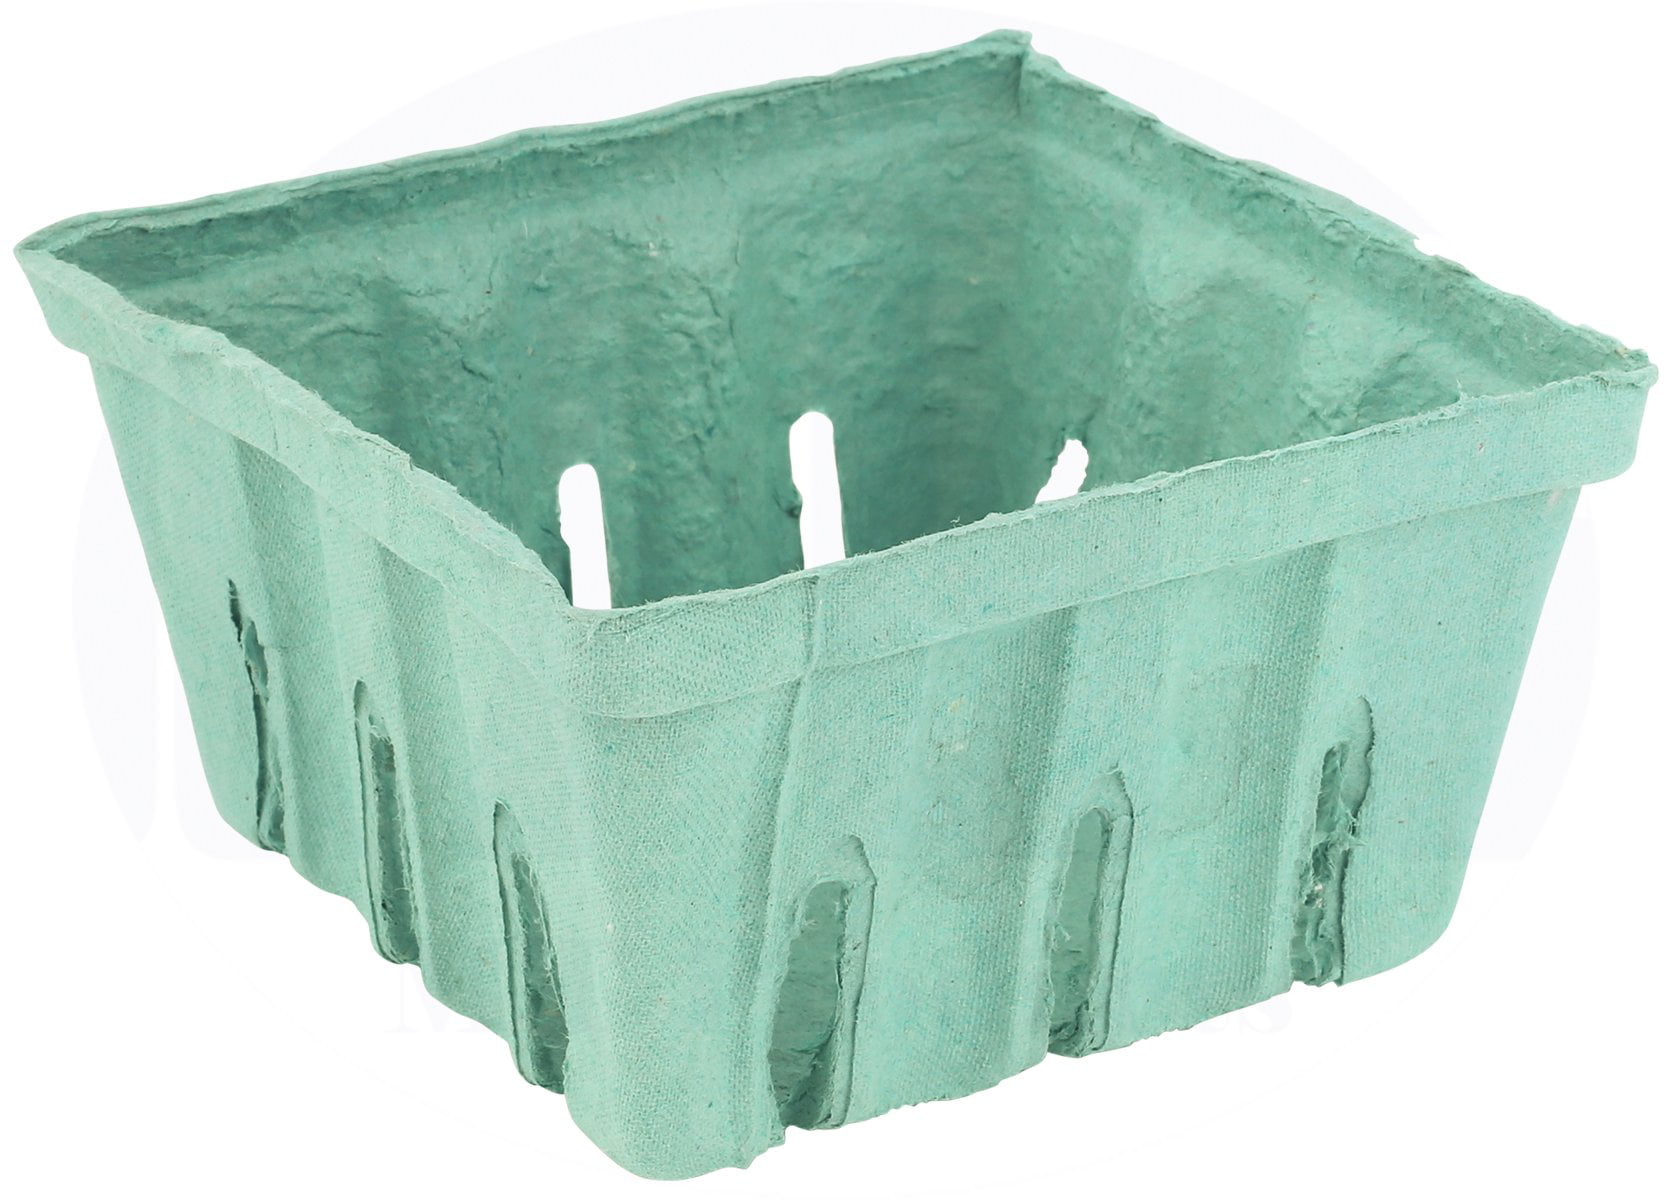 Details about    44 Pack Pint Green Molded Pulp Fiber Berry Basket Produce Vented Container ... 